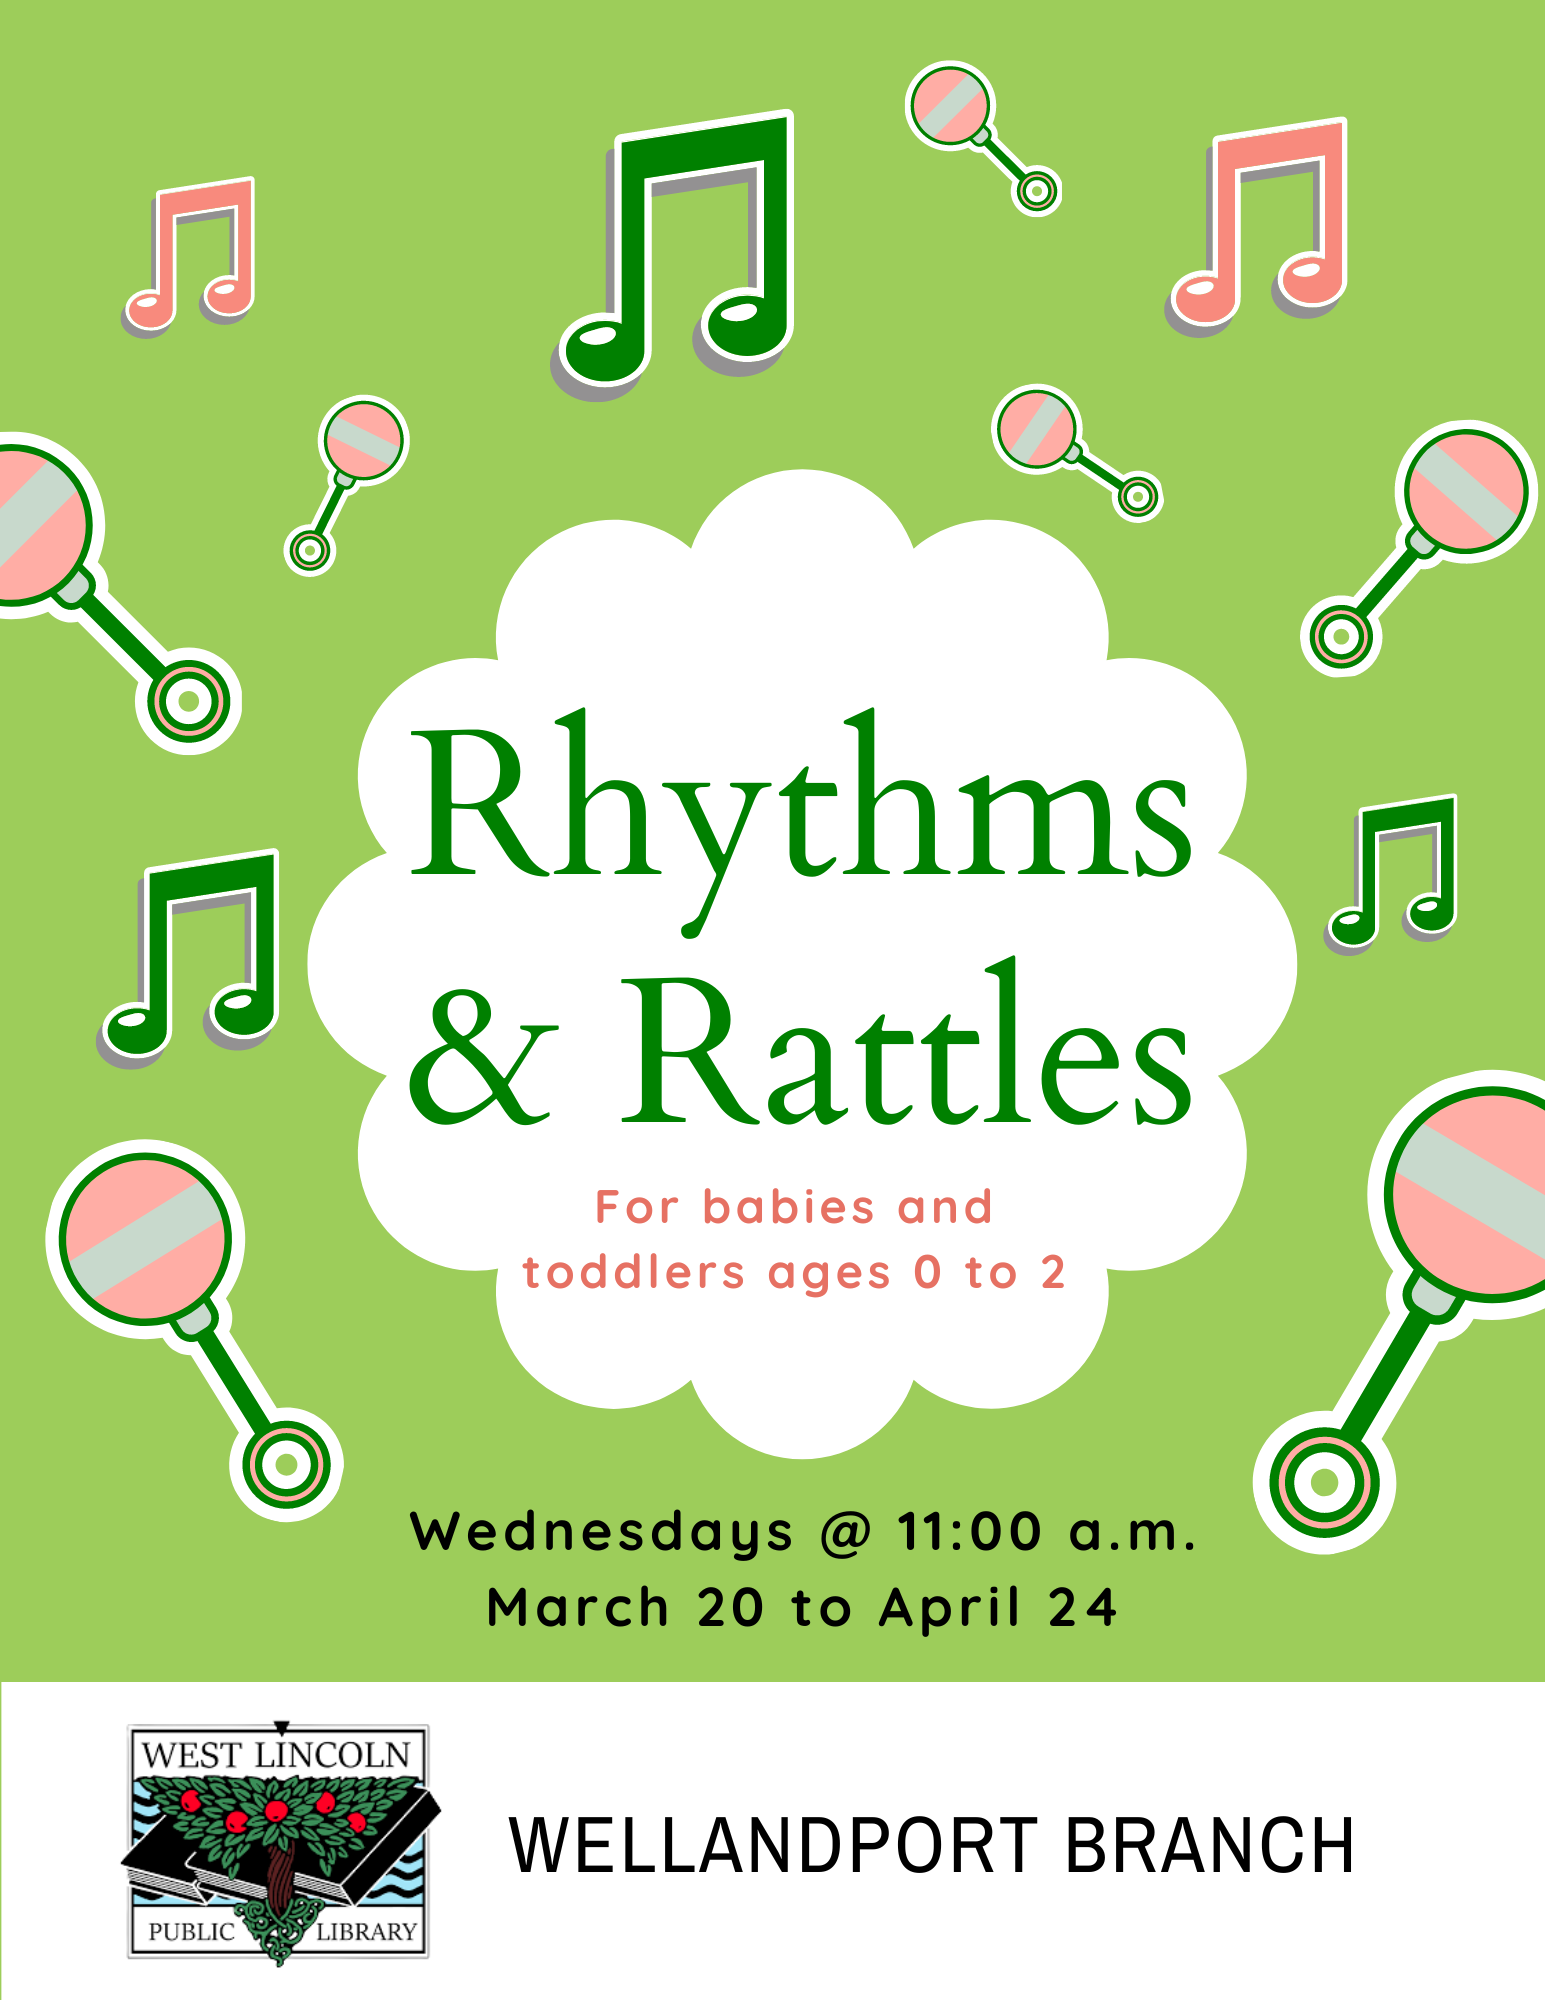 Rhythms and Rattles for babies and toddlers ages 0 to 2, Thursdays at 11:00 a.m. September 7 to October 26, Smithville Branch